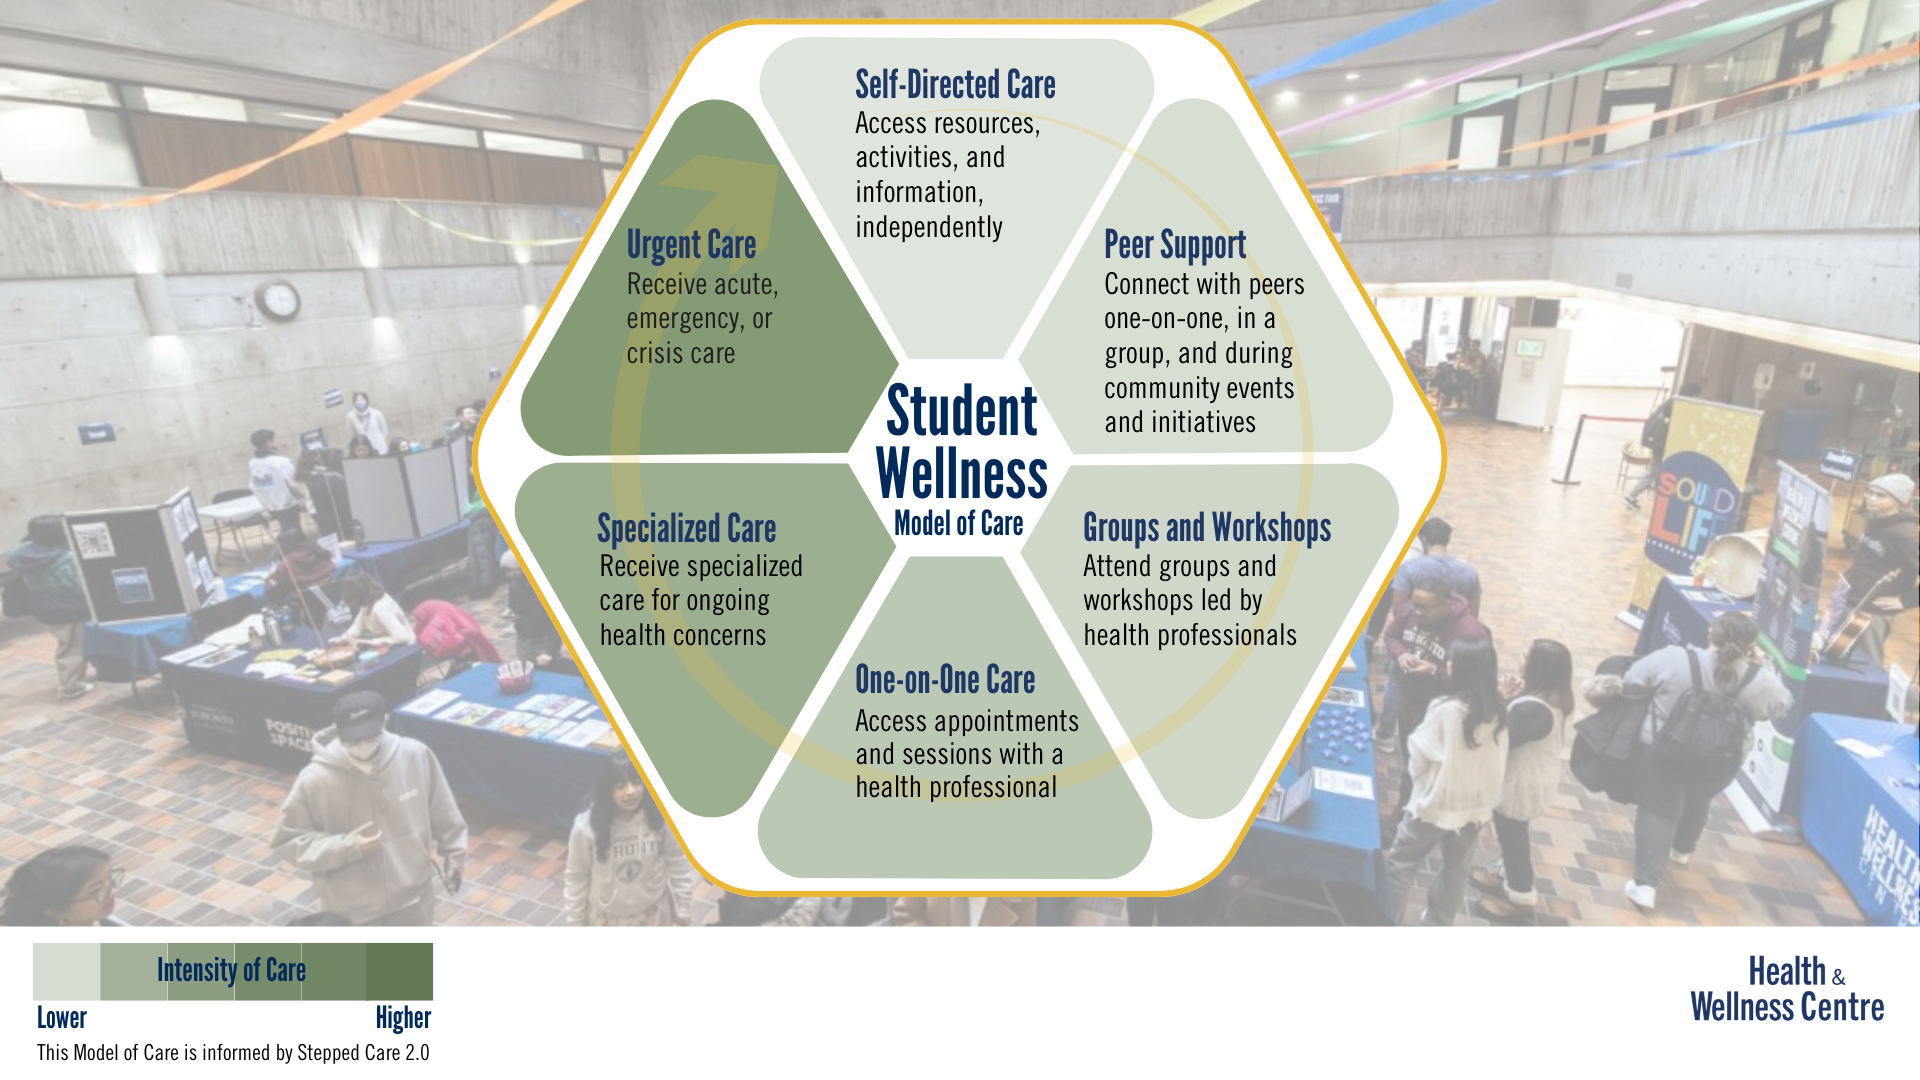 Student Wellness Model of Care increasing in intensity of care in the following order: Self-directed care, peer support, groups and workshops, one-on-one care, specialized care, and urgent care.